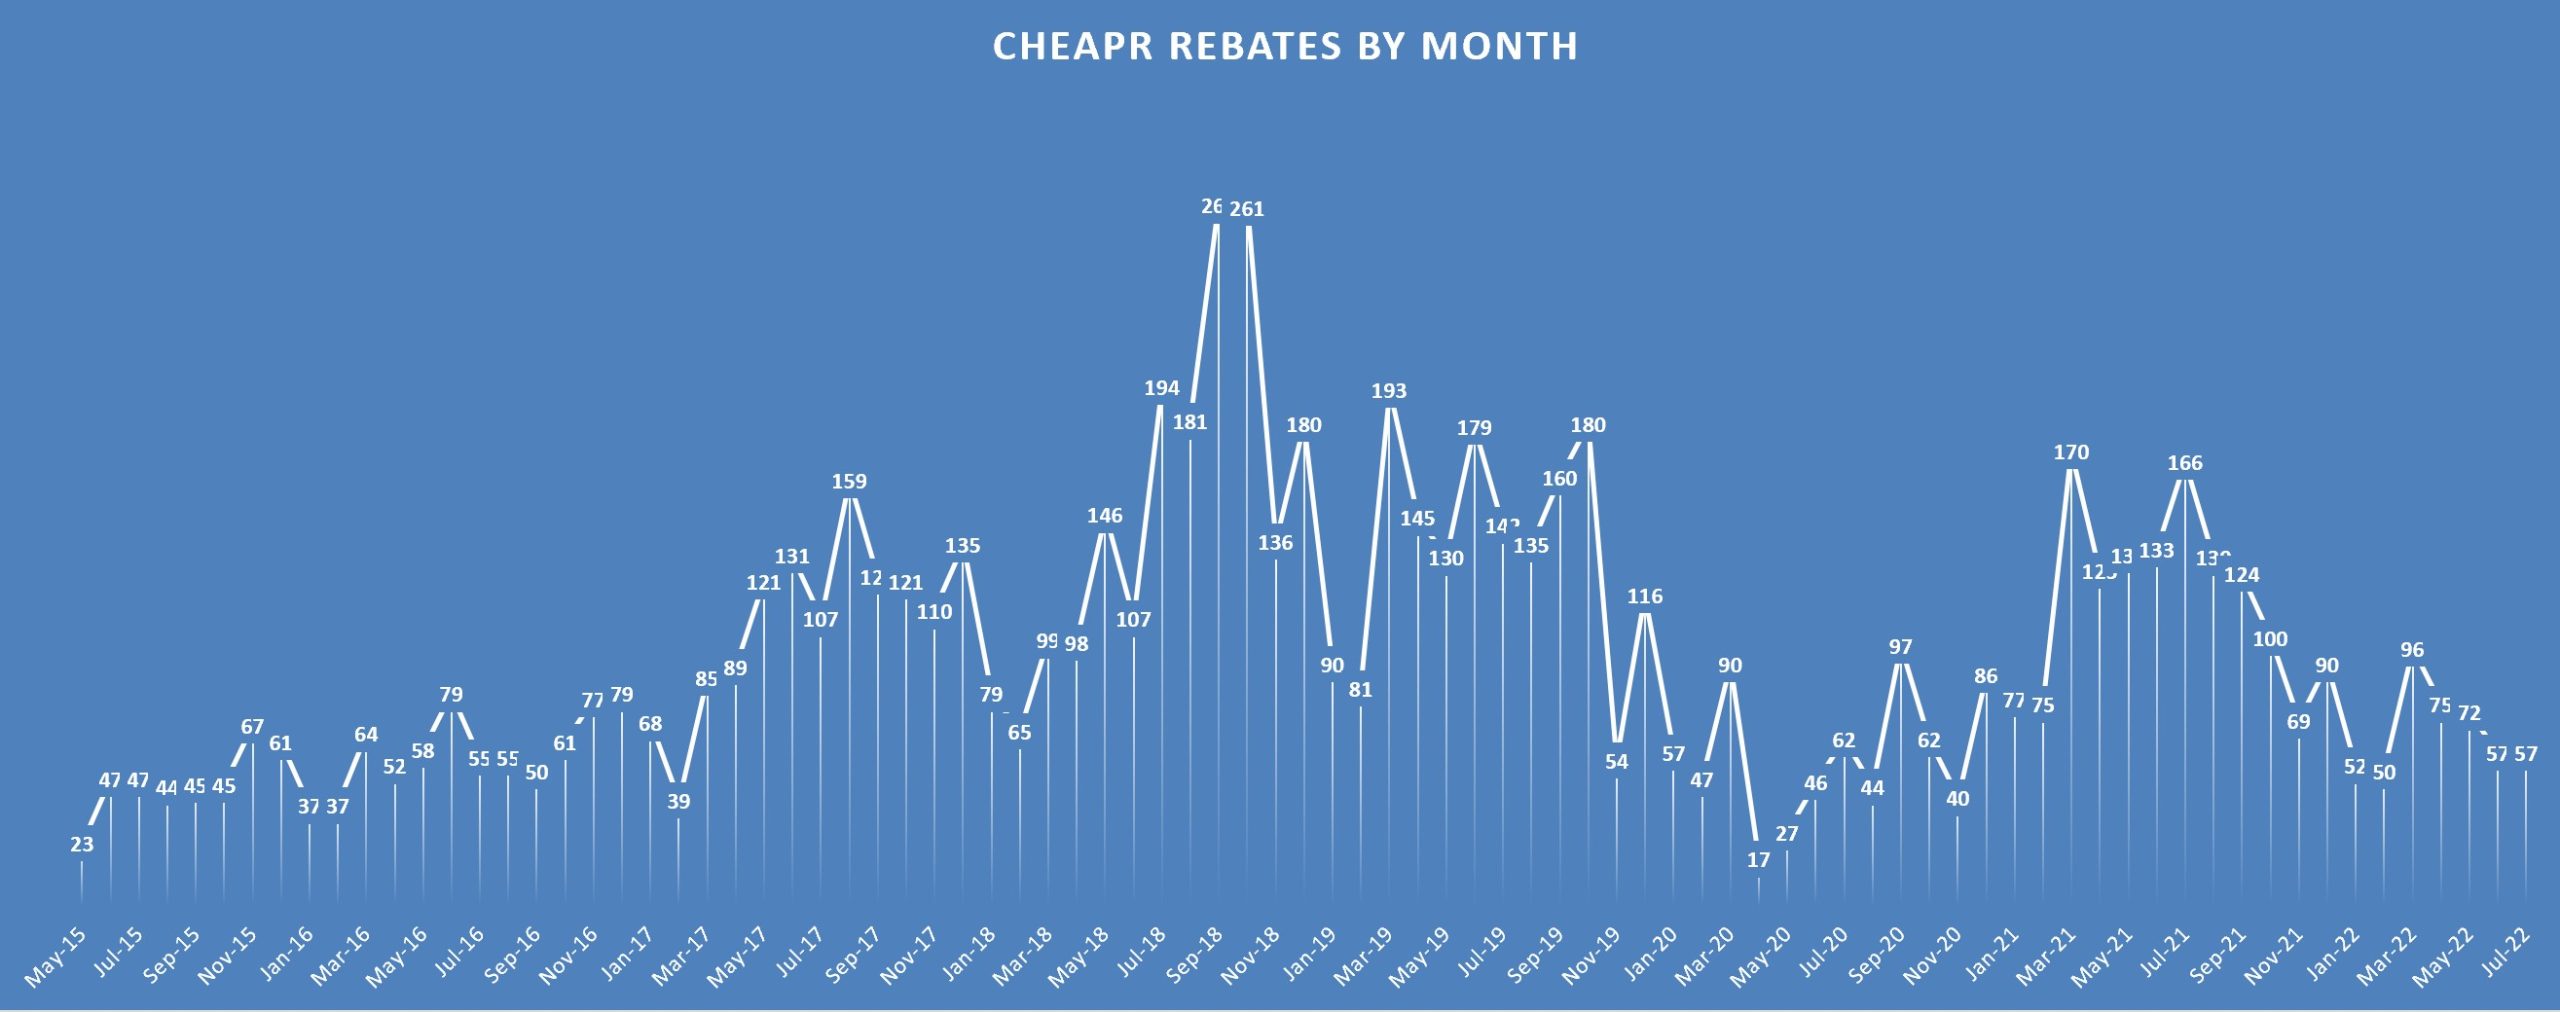 CHEAPR Rebates by Month Through July 2022